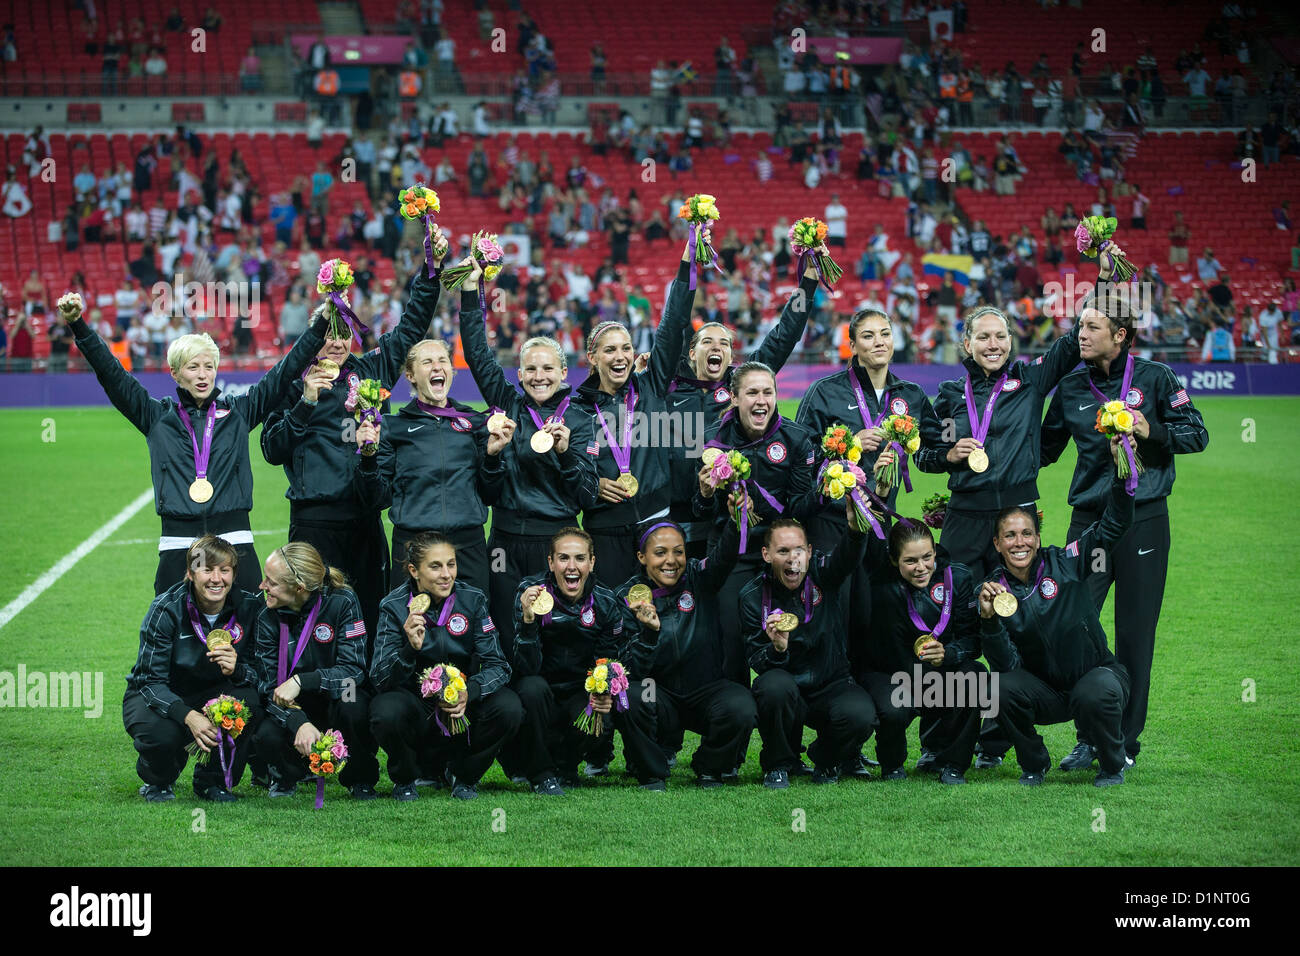 USA wins gold over Japan in Women's Football (soccer) at the Olympic Summer Games, London 2012 Stock Photo